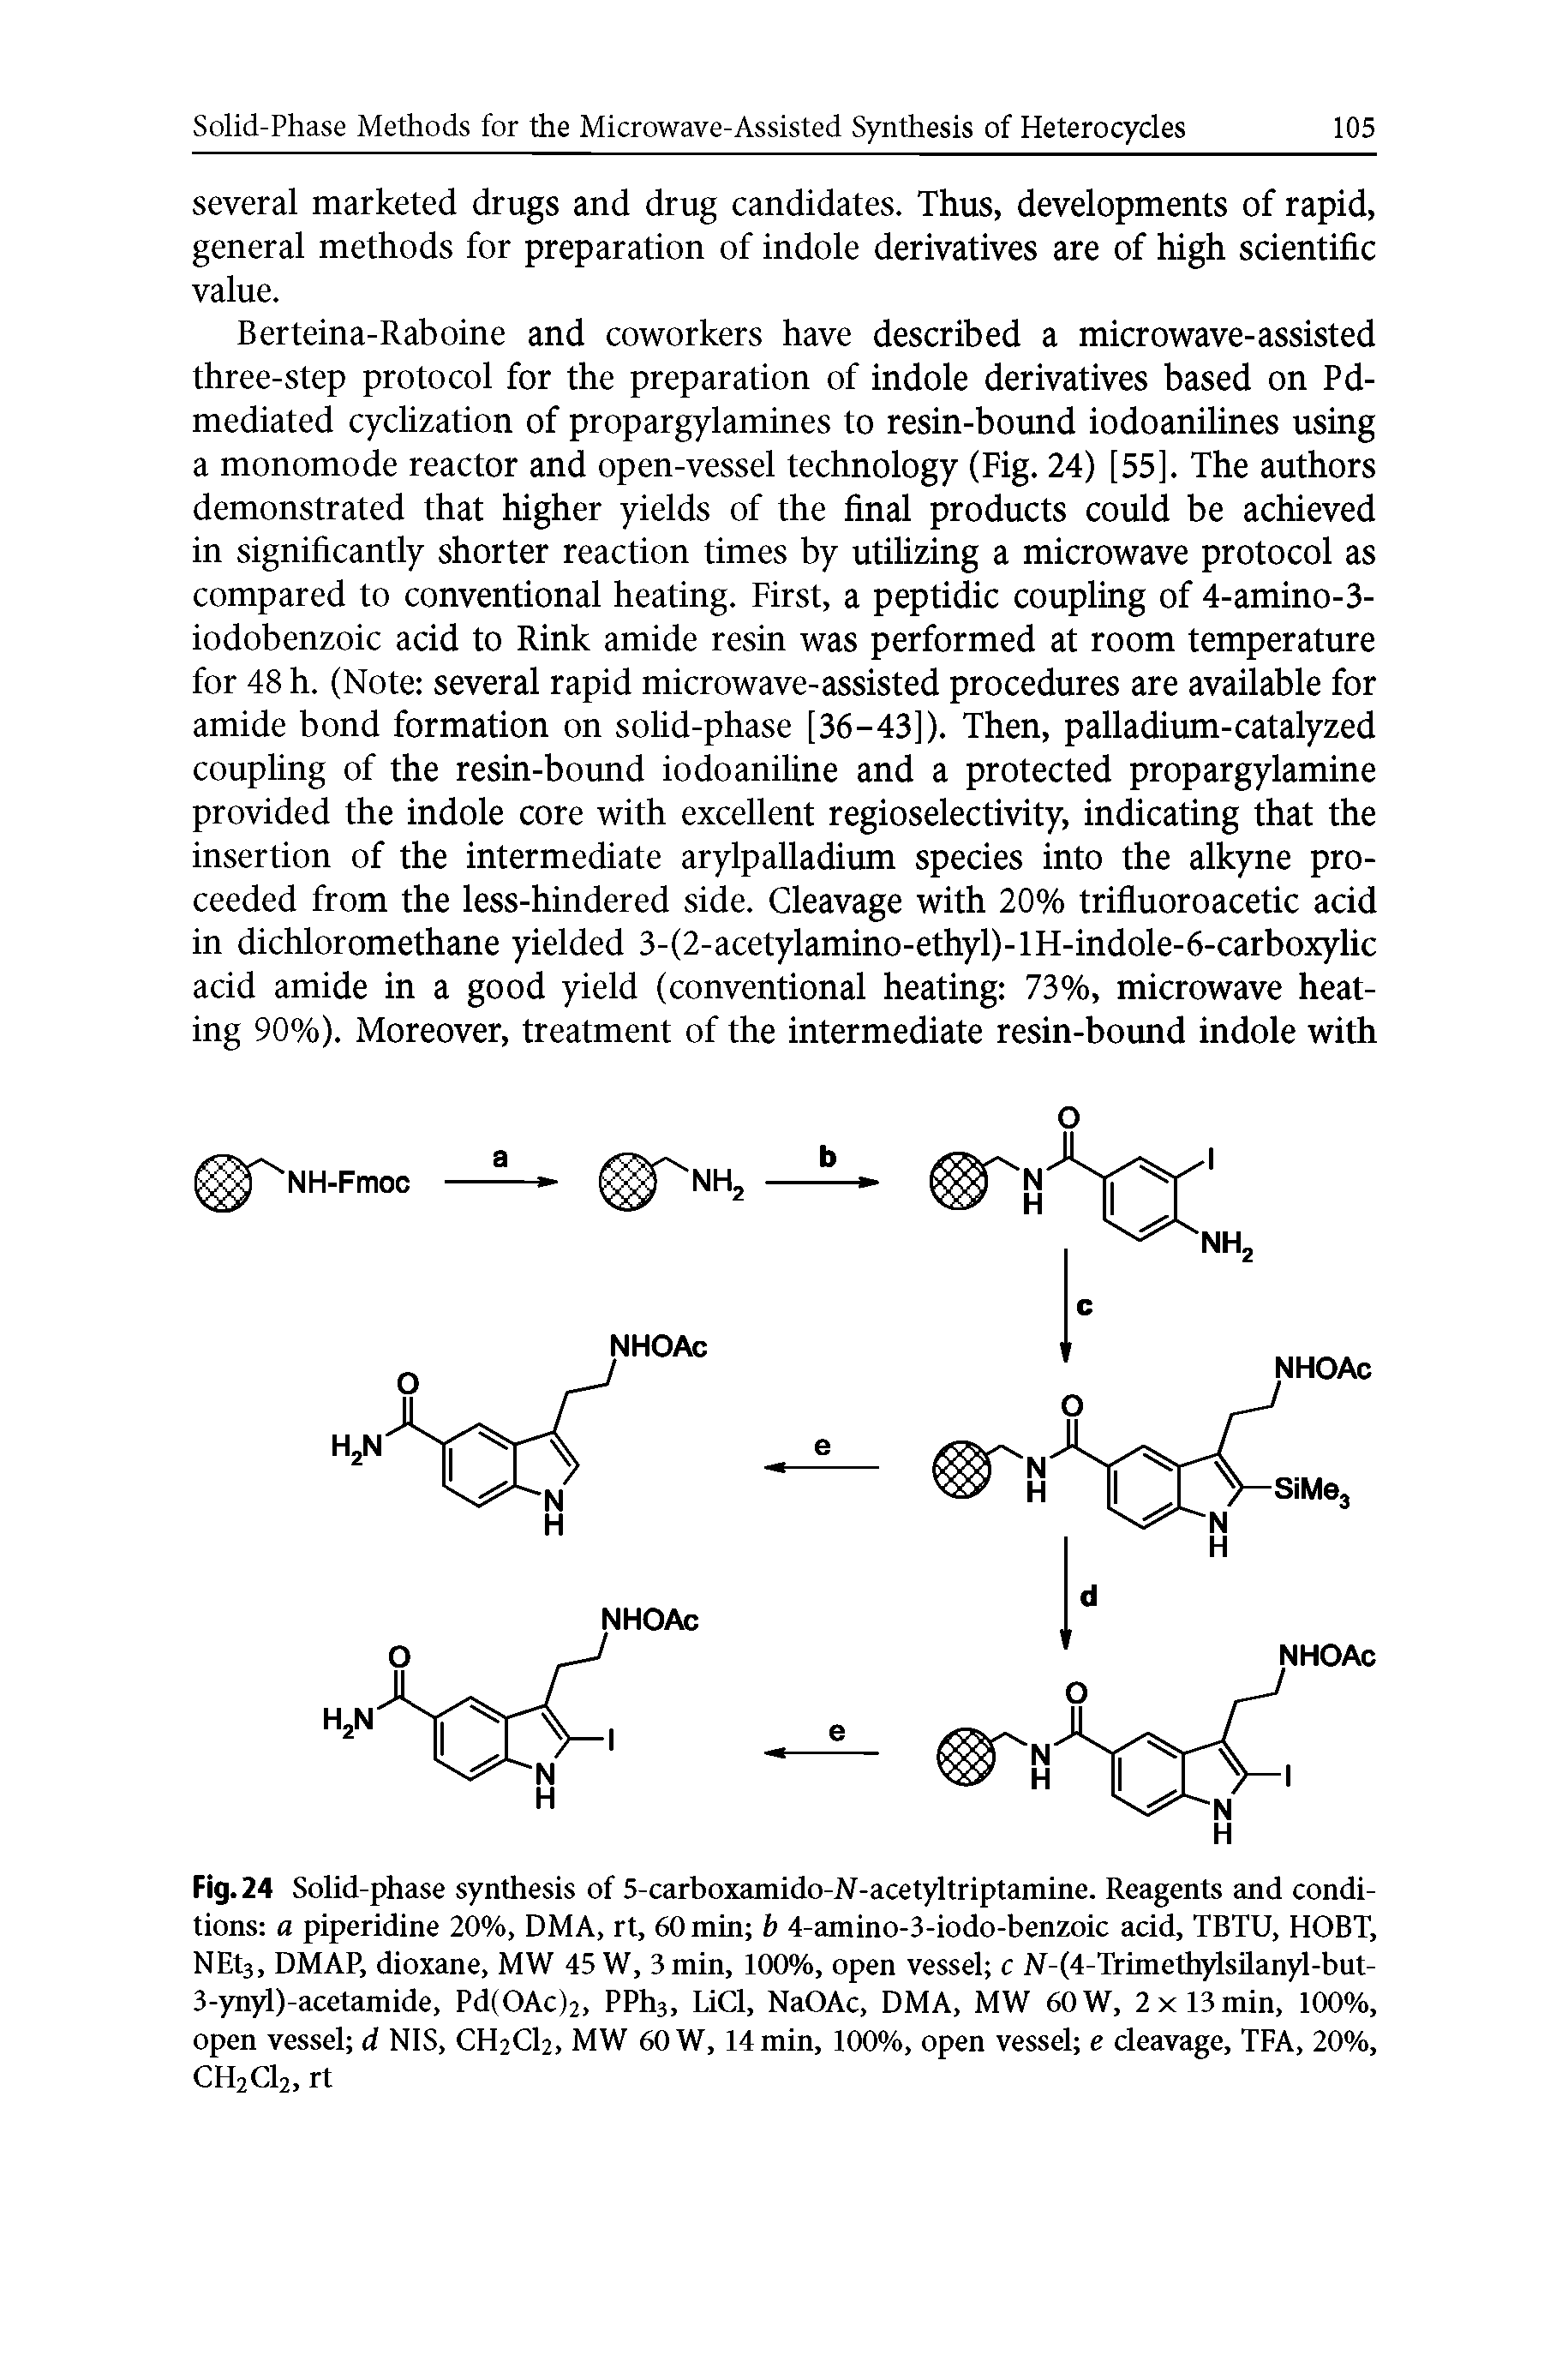 Fig. 24 Solid-phase synthesis of 5-carboxamido-iV-acetyltriptamine. Reagents and conditions a piperidine 20%, DMA, rt, 60 min b 4-amino-3-iodo-benzoic acid, TBTU, HOBT, NEt3, DMAP, dioxane, MW 45 W, 3 min, 100%, open vessel c N-(4-Trimethylsilanyl-but-3-ynyl)-acetamide, Pd(OAc)2, PPhs, LiCl, NaOAc, DMA, MW 60 W, 2x13 min, 100%, open vessel d NIS, CH2CI2, MW 60 W, 14 min, 100%, open vessel e cleavage, TFA, 20%, CH2CI2, rt...